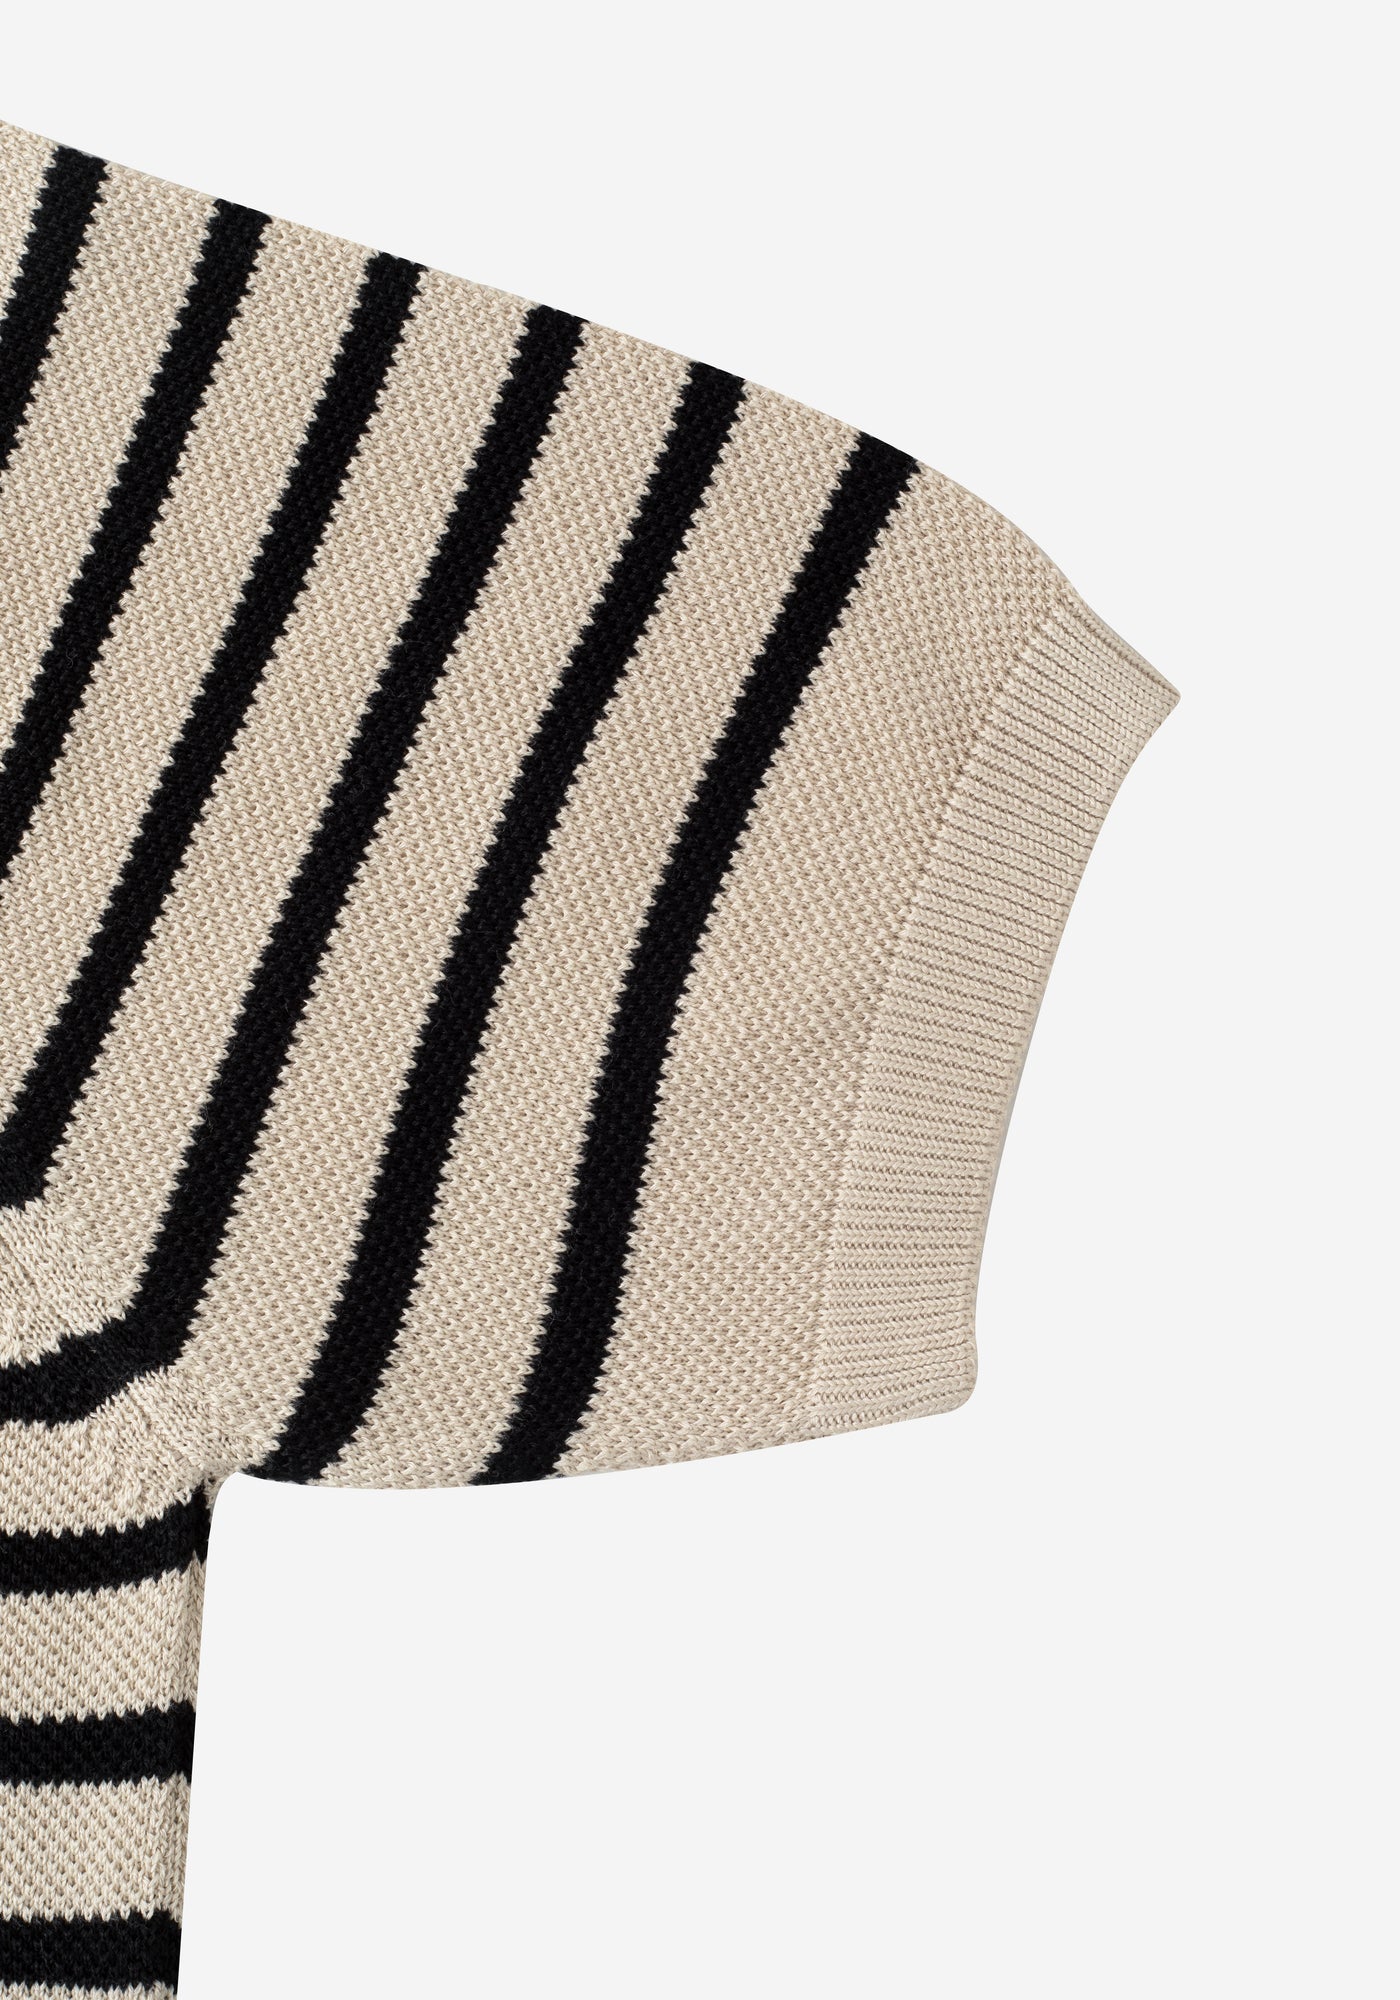 Almond Beige Stripe Knitted Polo Shirt